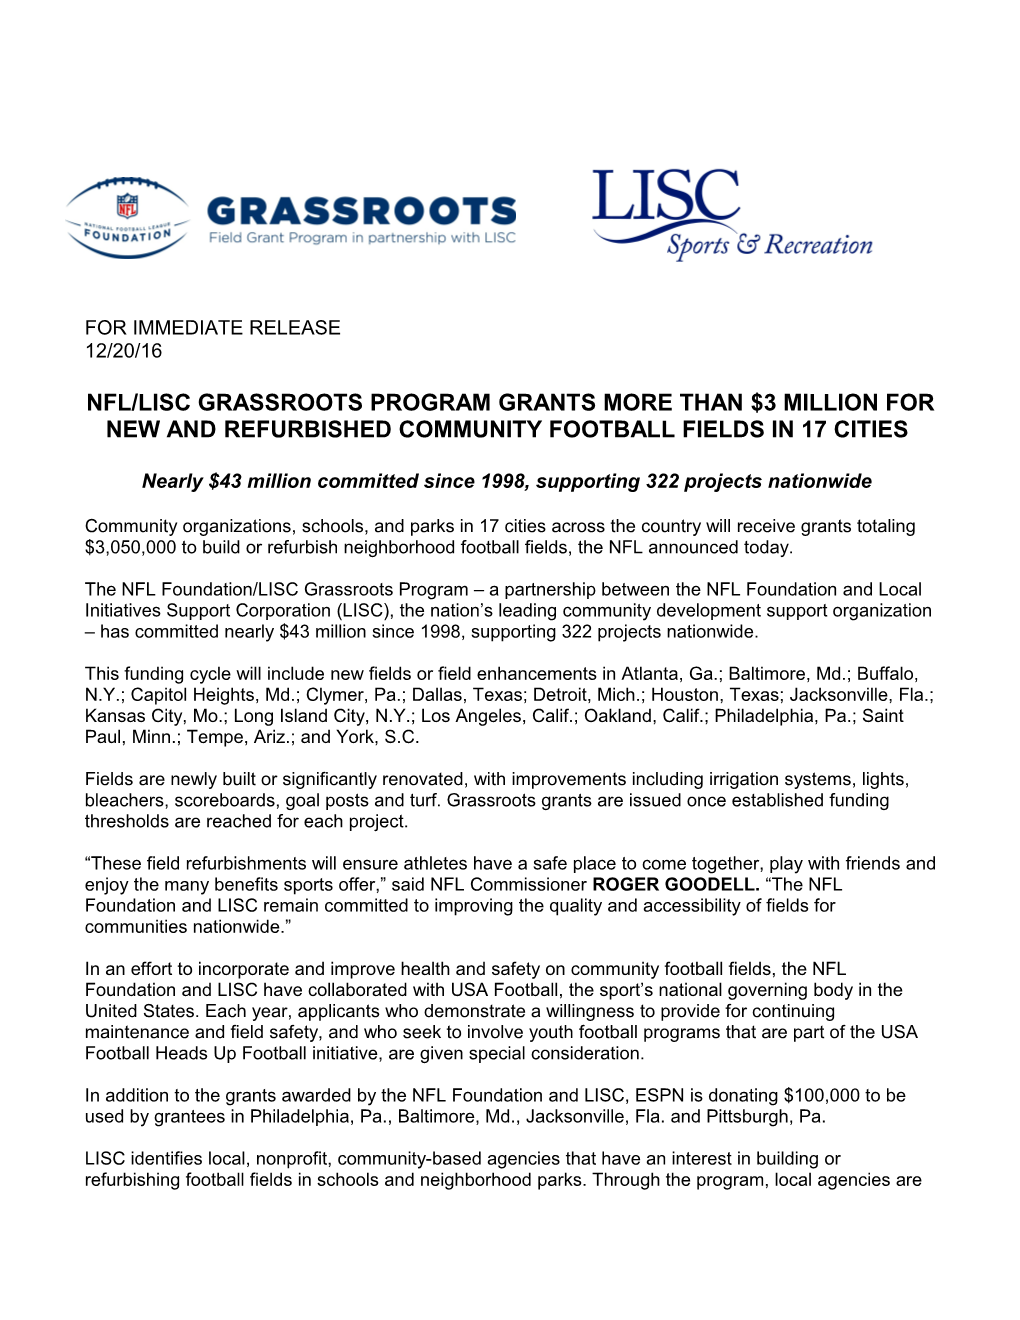 Nfl/Lisc Grassroots Program Grants More Than $3 Million for New and Refurbished Community